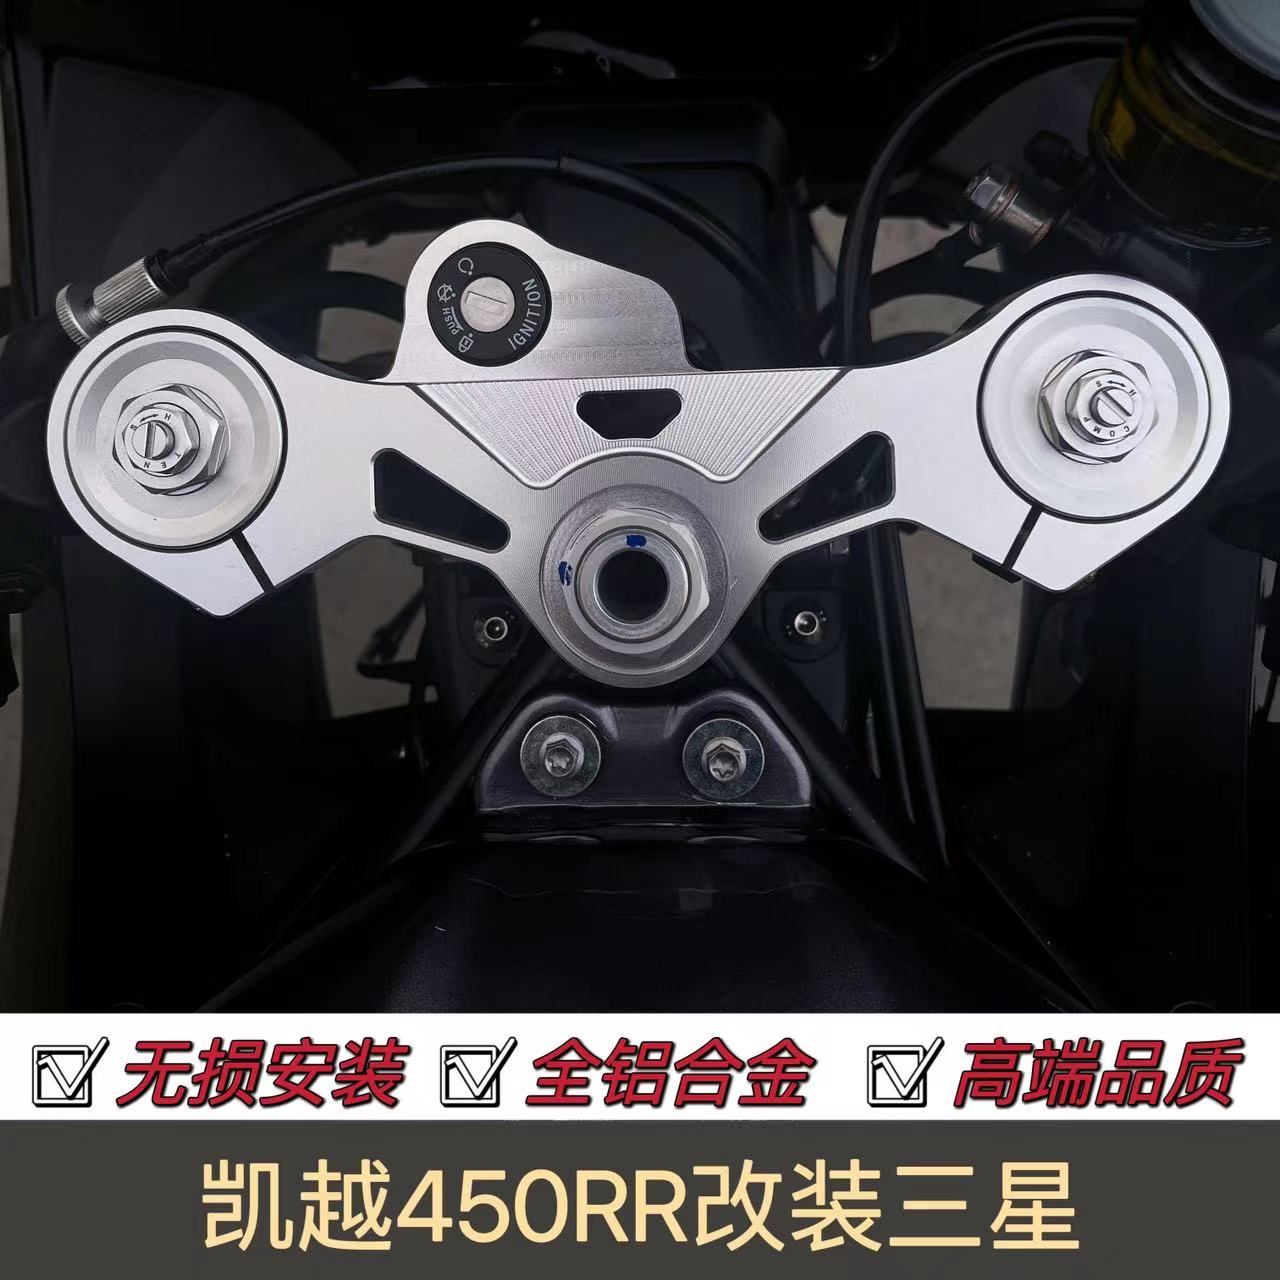 Suitable for Kai Yue 450RR Upper Samsung Online Plate Retrofit WINDSHIELD Kaiyue 450RR rear Licence Short-tailed retrofit-Taobao